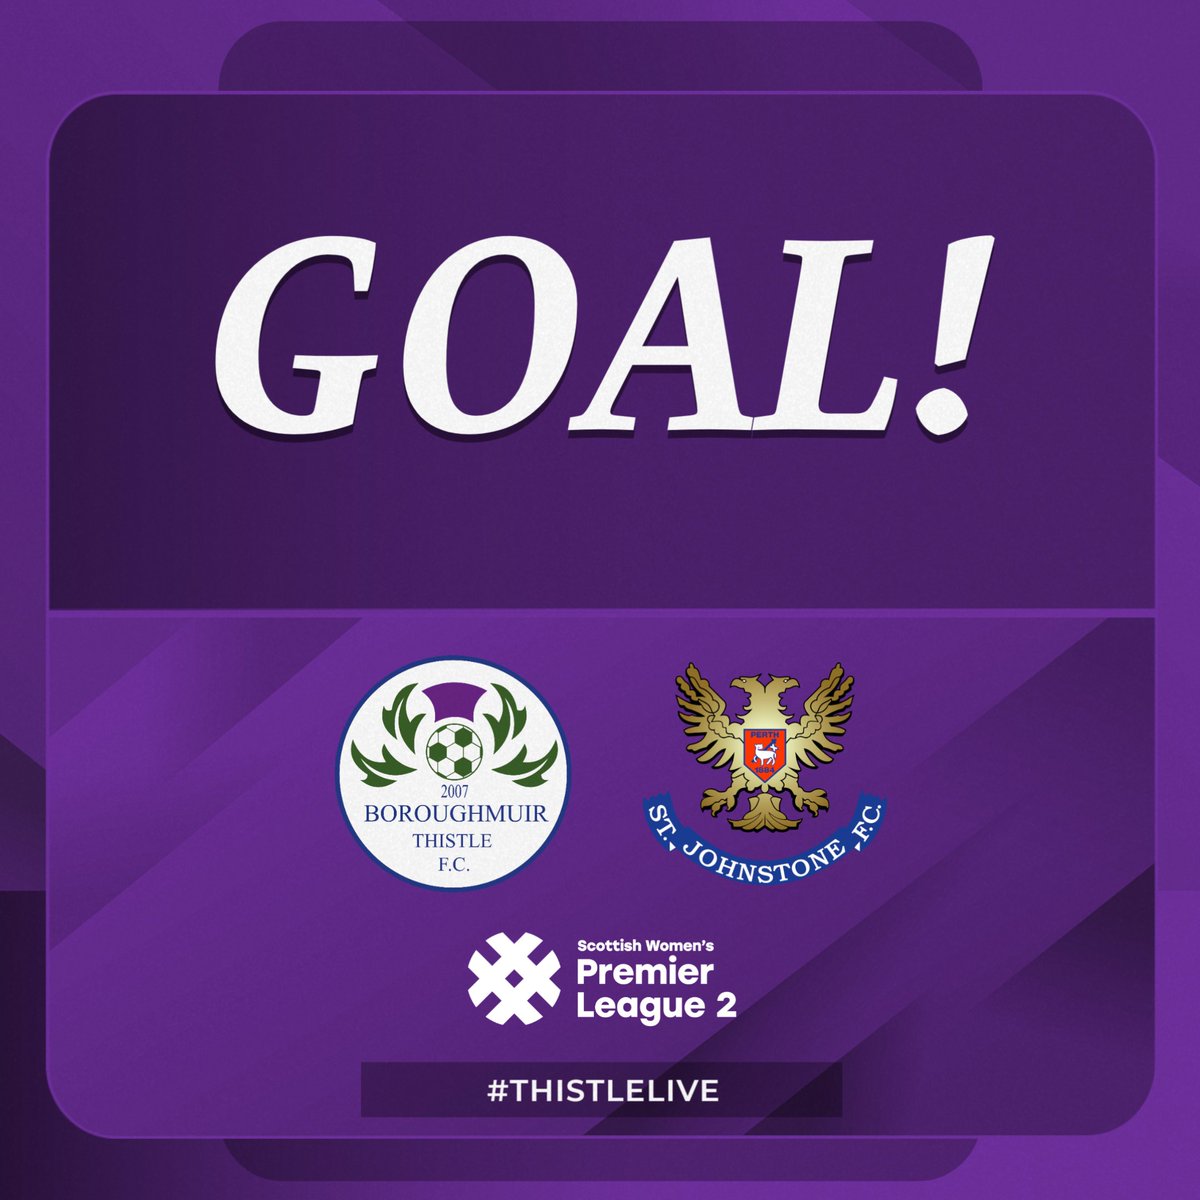 𝗚𝗢𝗢𝗢𝗔𝗔𝗔𝗟𝗟𝗟!!! Ria McCafferty picks up the short corner before turning and laying it off for Fiona Gibson to rattle home off the post!! 🟣1-0🔵 | 15' | #ThistleLive